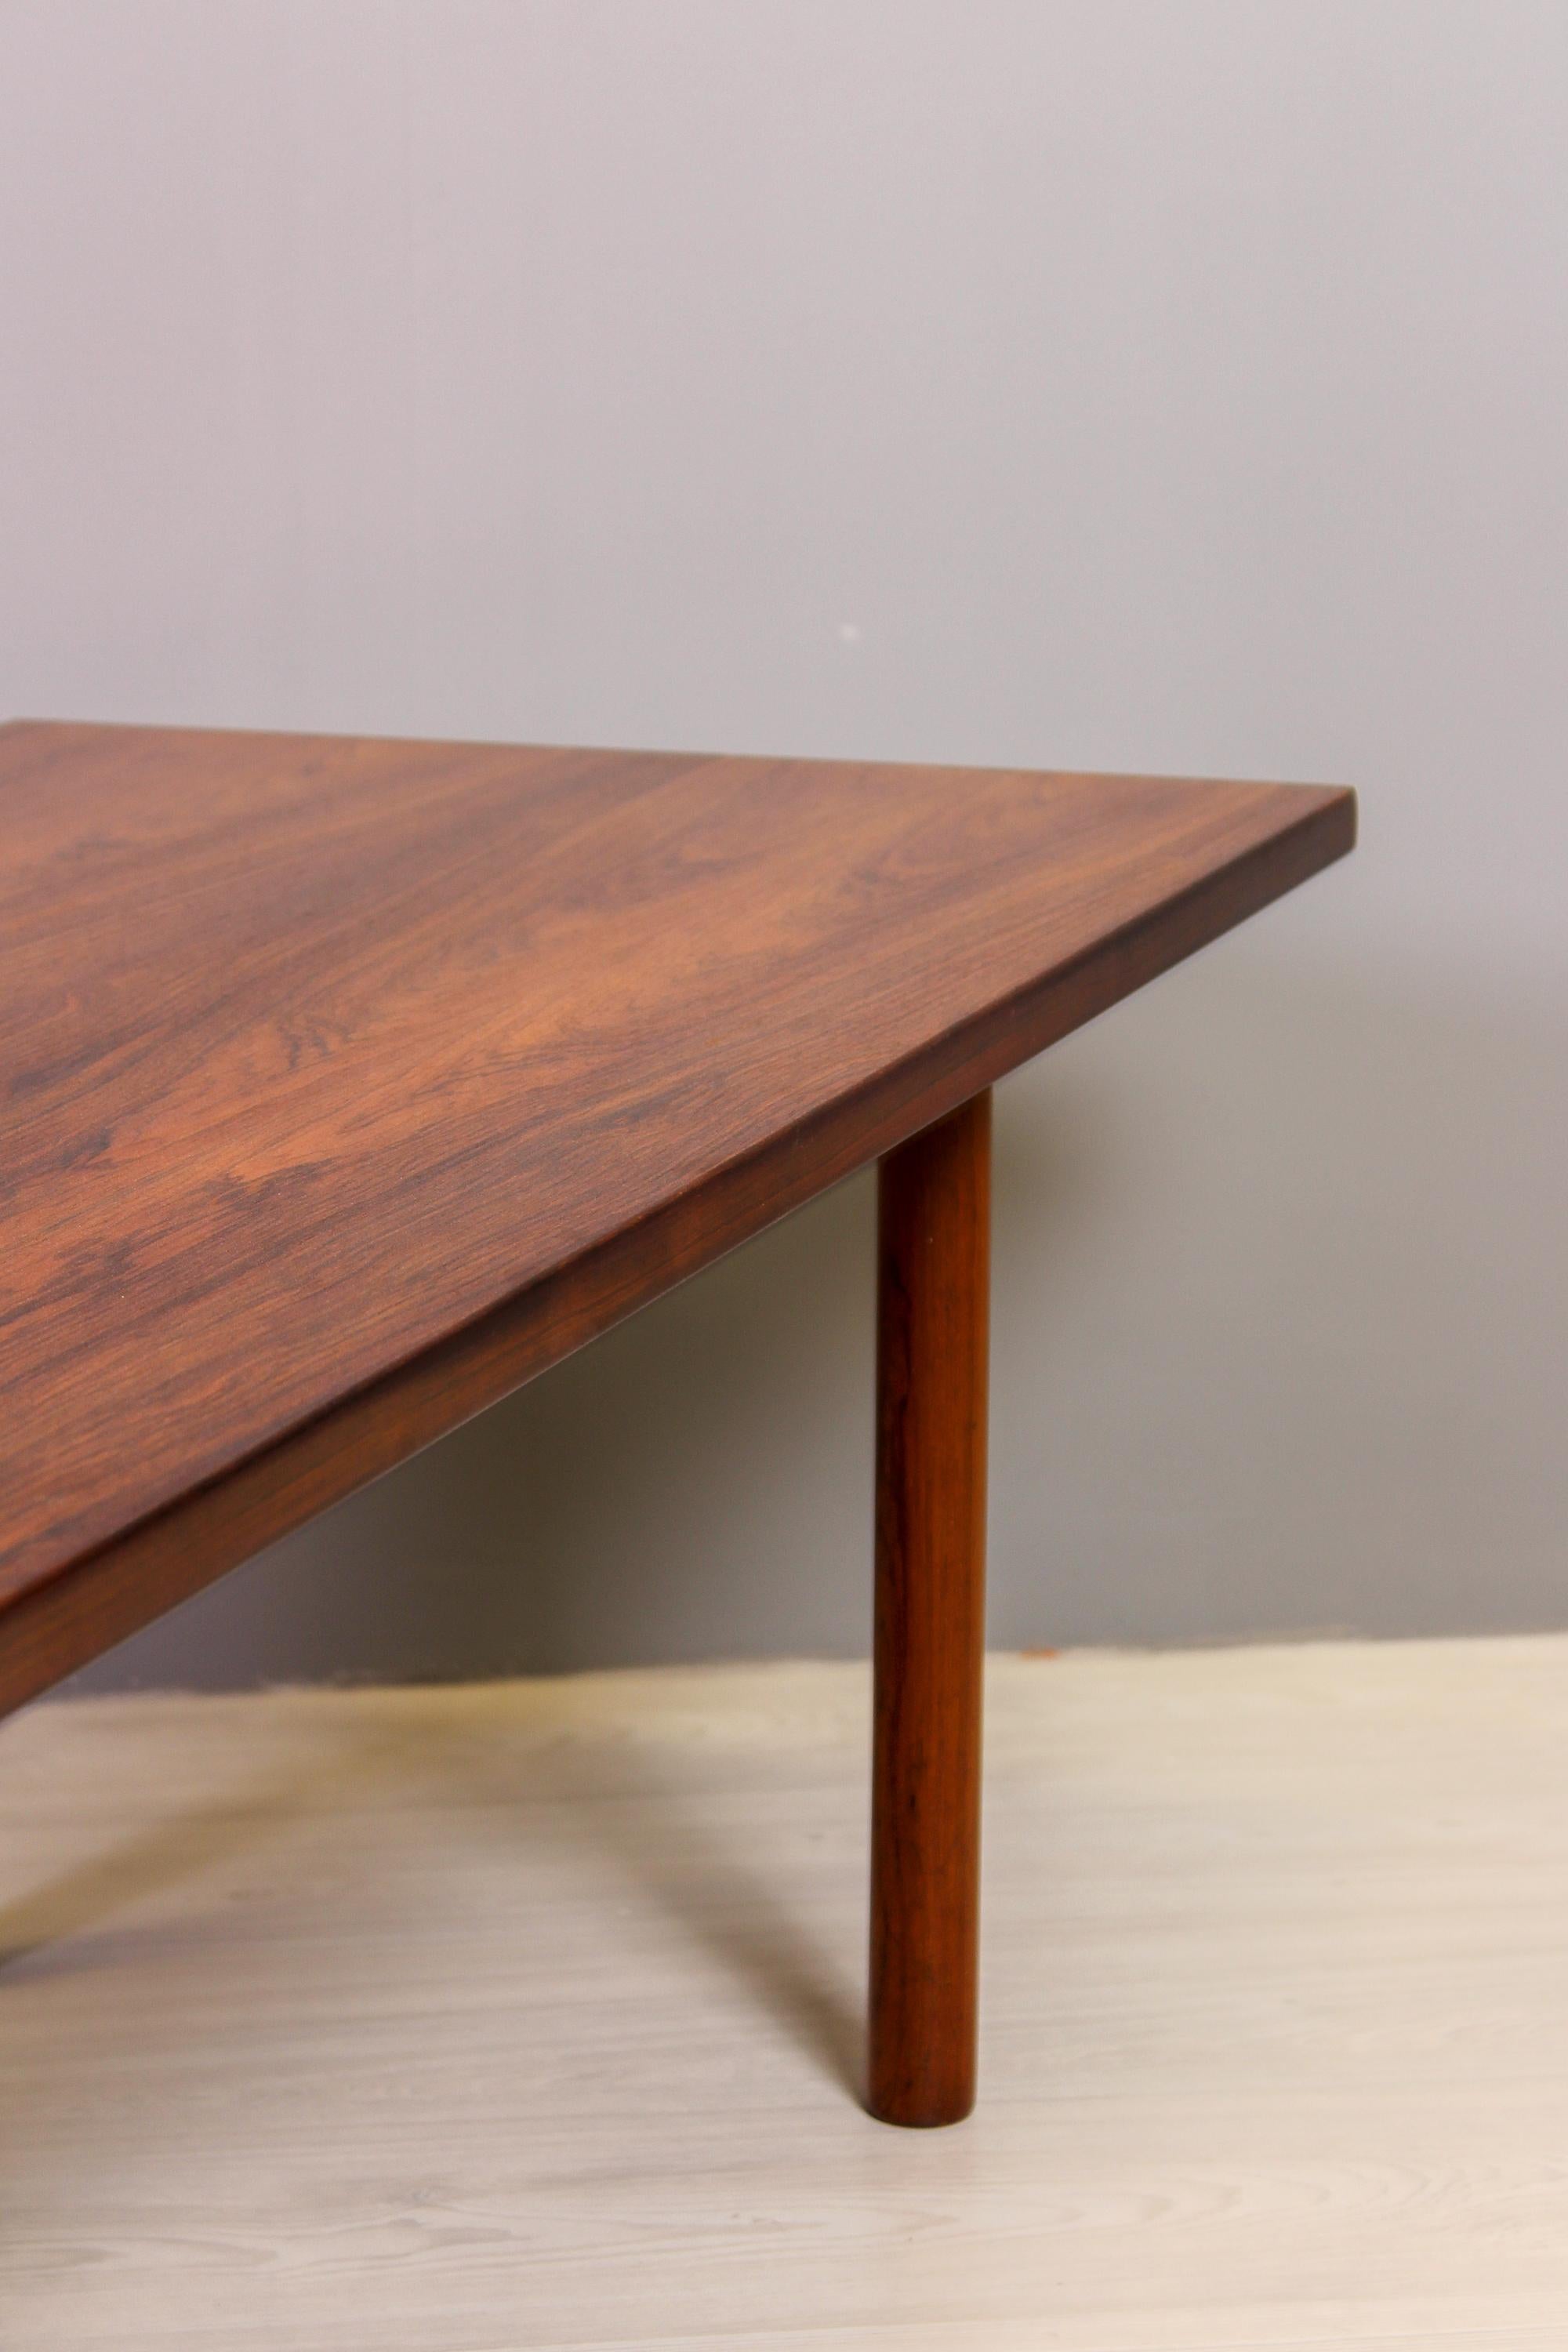 Hans J Wegner Rosewood Coffee Table by Andreas Tuck, 1950s For Sale 4